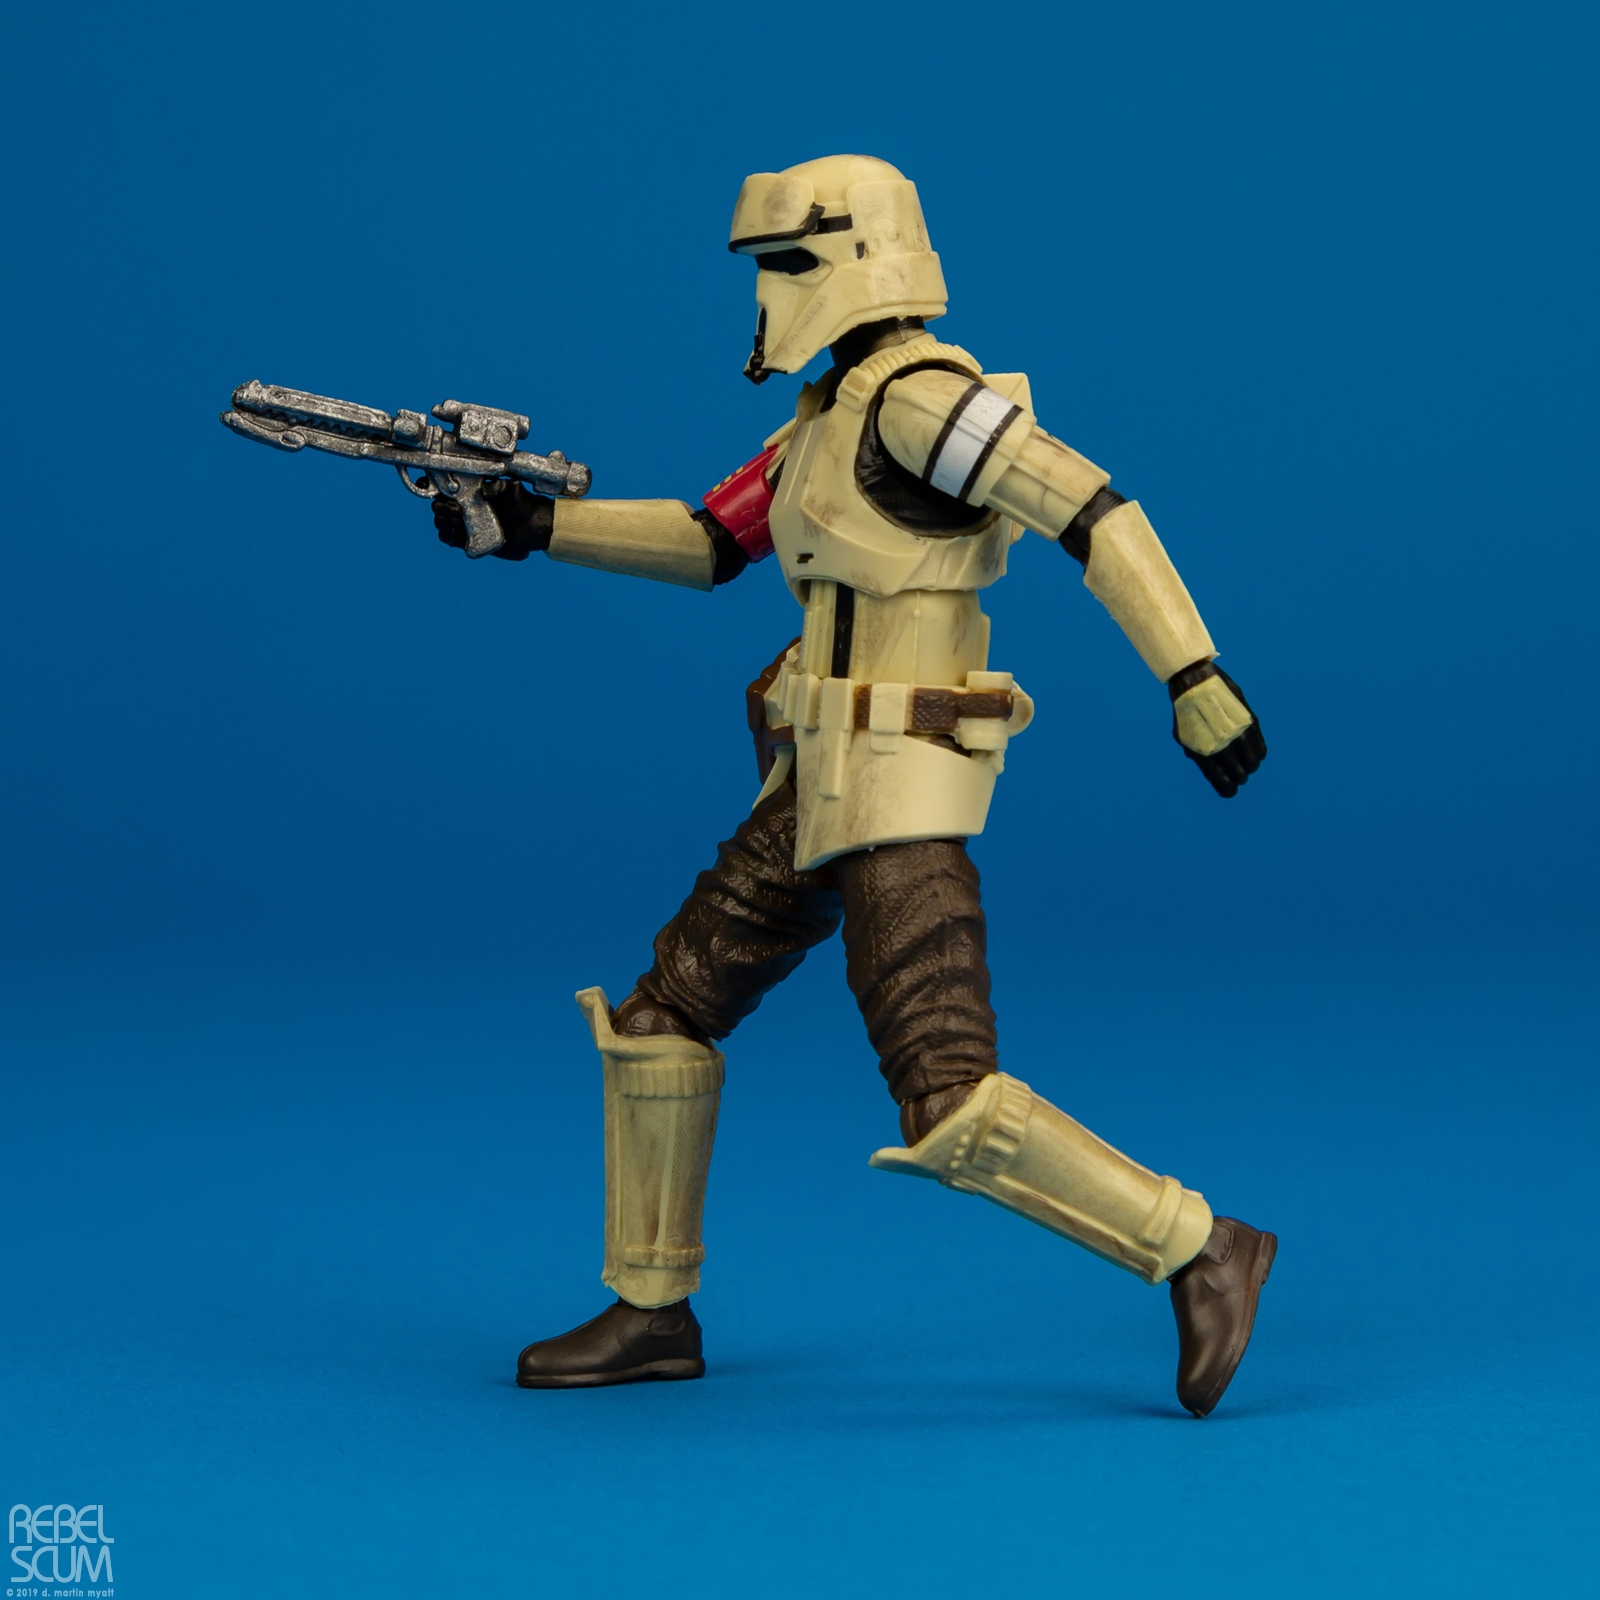 VC133-Scarif-Stormtrooper-The-Vintage-Collection-Hasbro-006.jpg